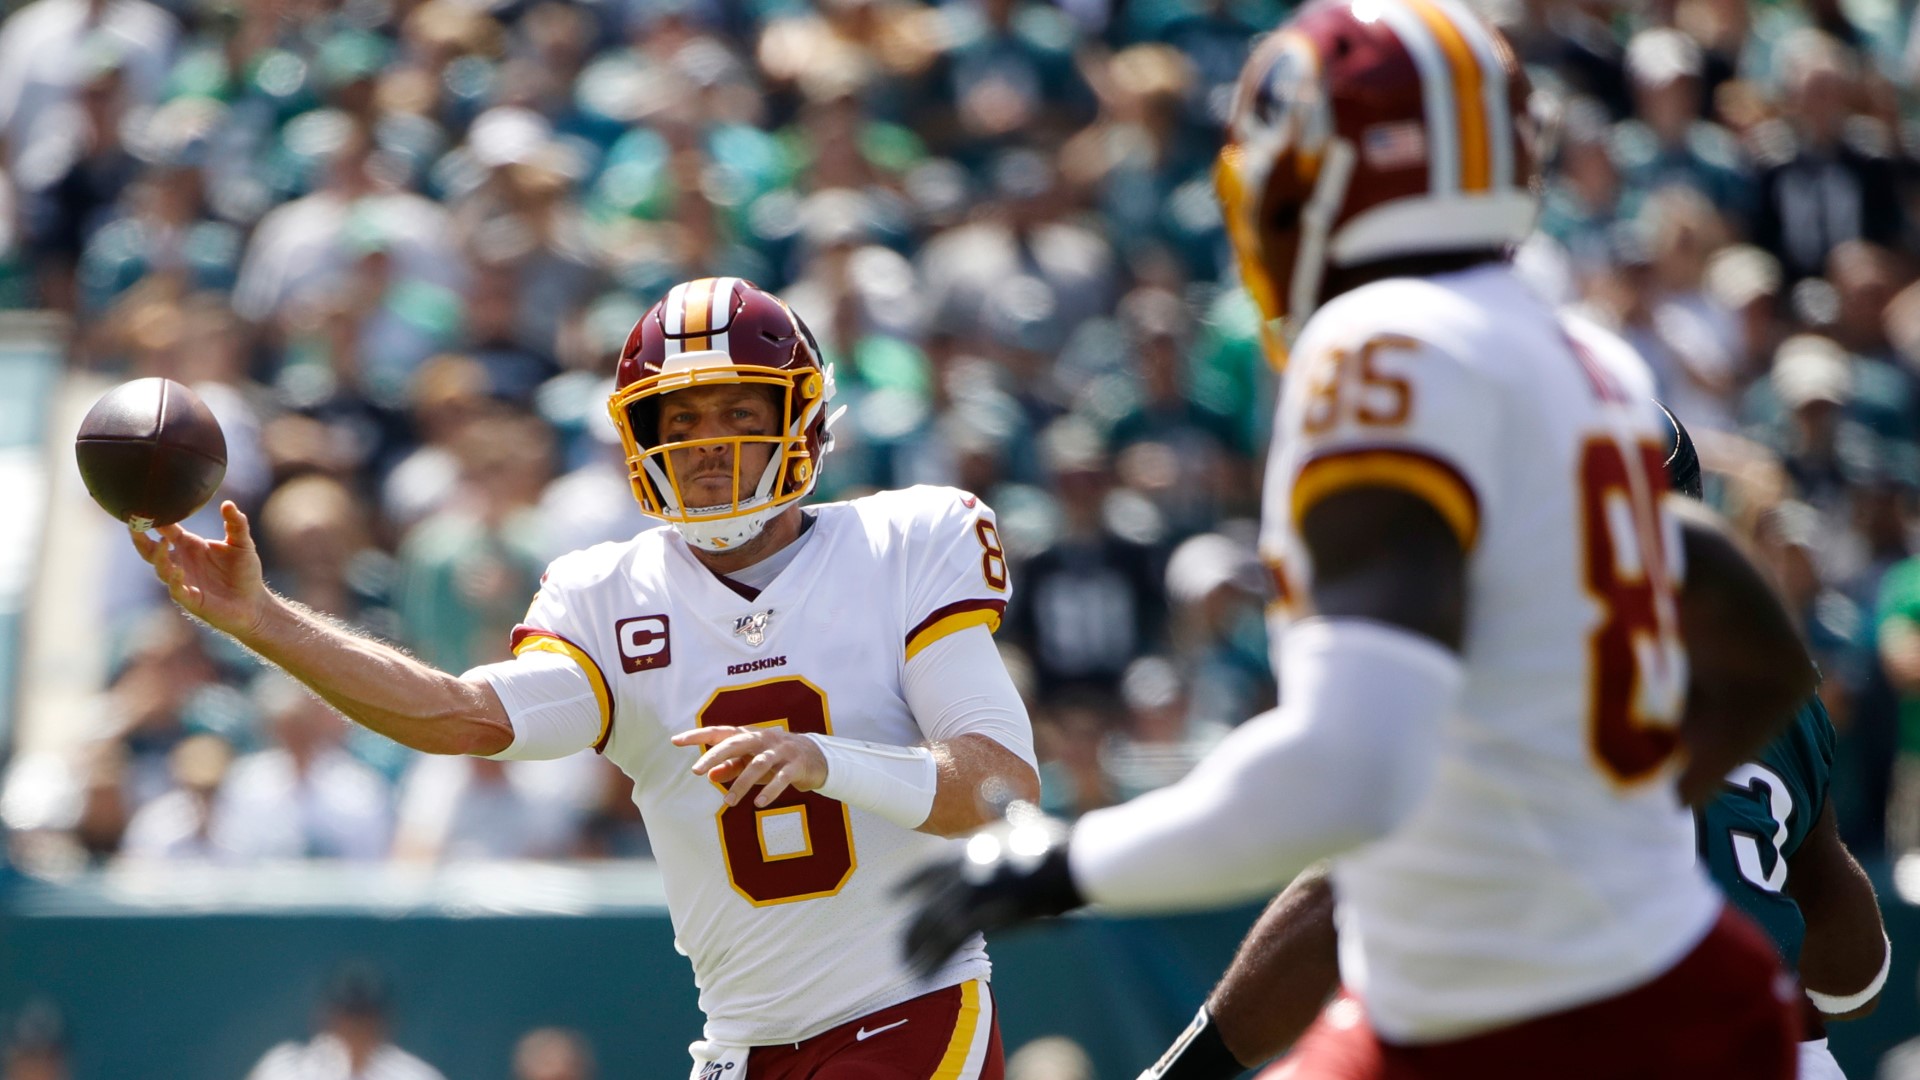 Thoughts from Redskins quarterback, Case Keenum and linebacker, Jon Bostic.